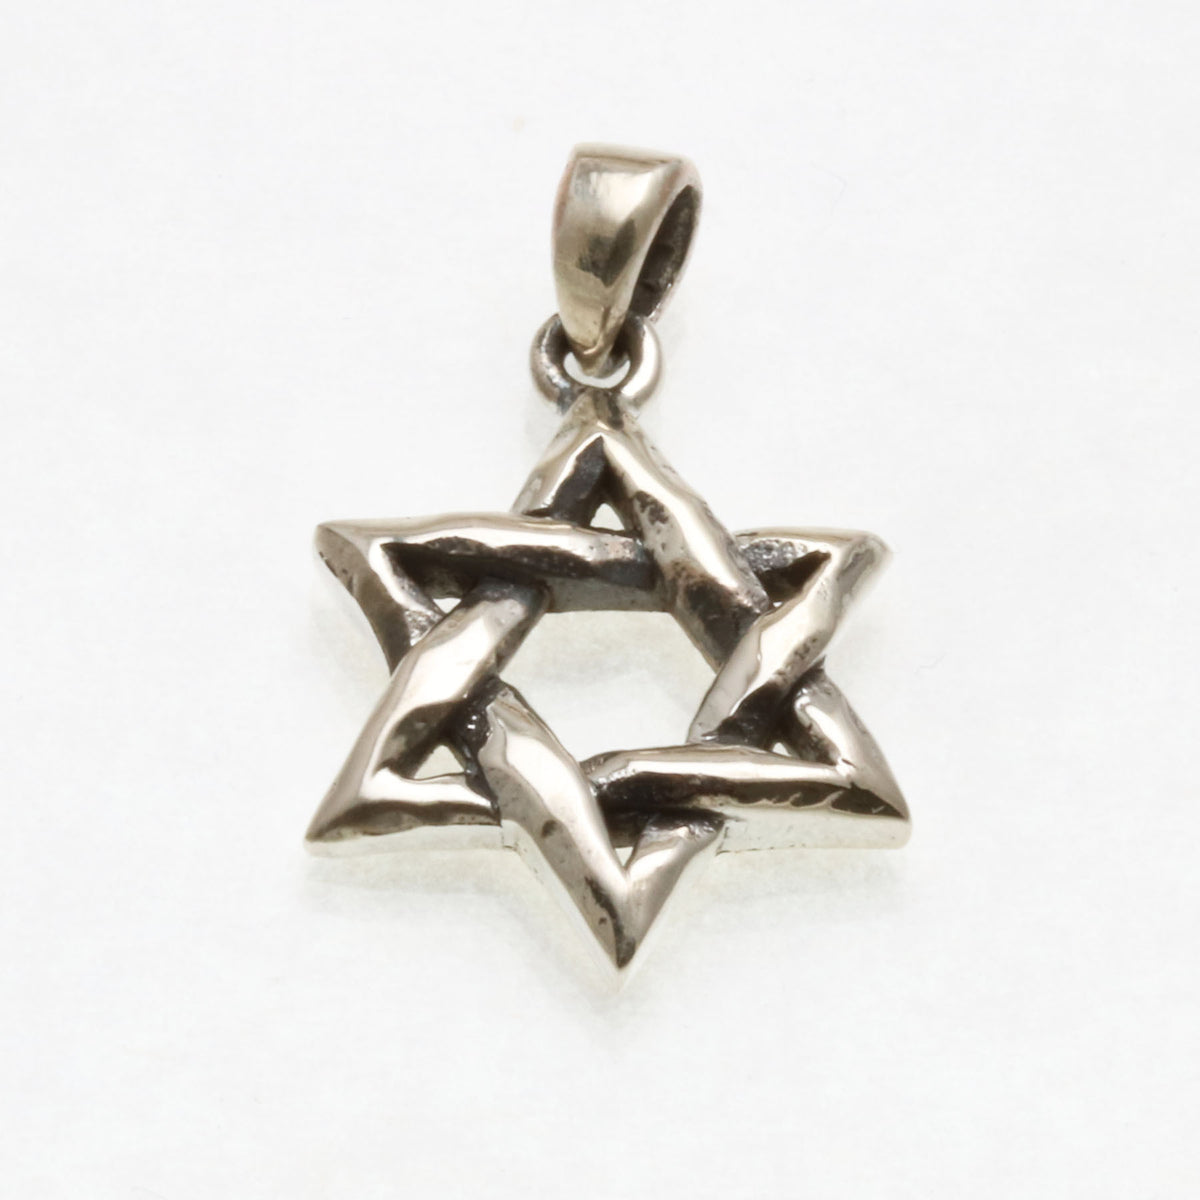 Sterling Silver Woven Star of David Pendant Oxidized - JewelryJudaica